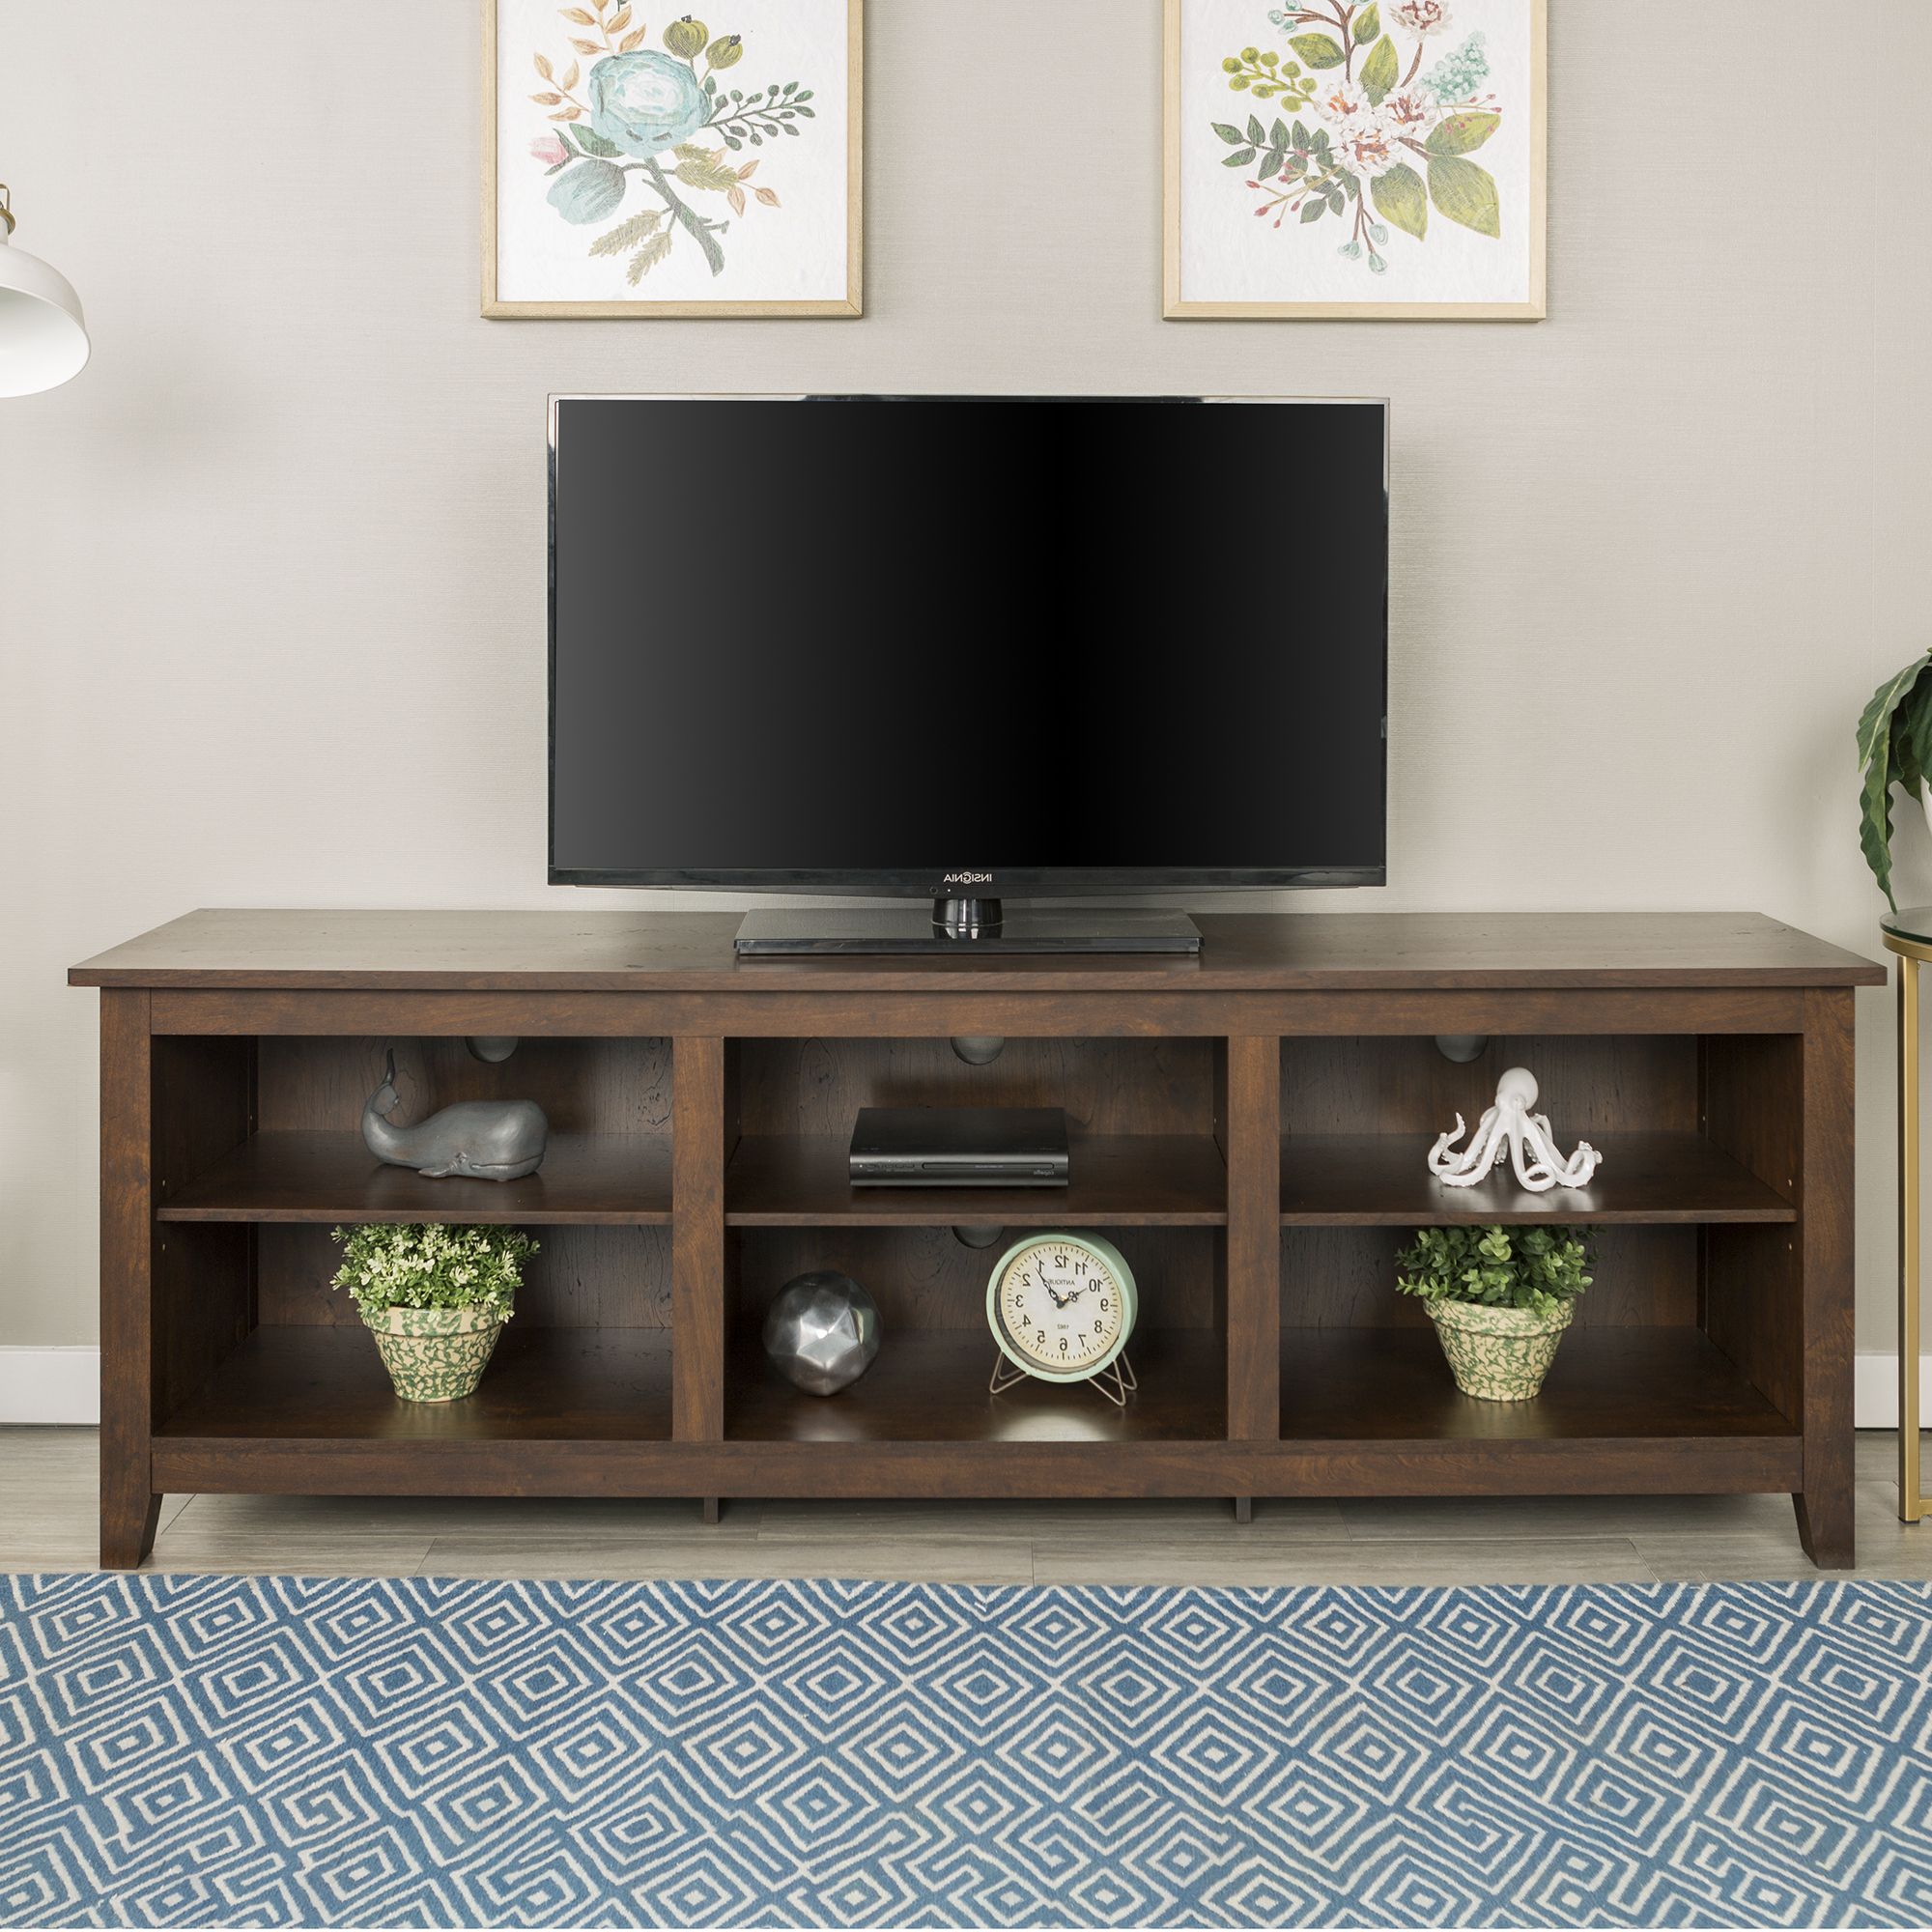 Manor Park Wood Tv Media Storage Stand For Tvs Up To 78 Pertaining To Petter Tv Media Stands (Gallery 1 of 20)